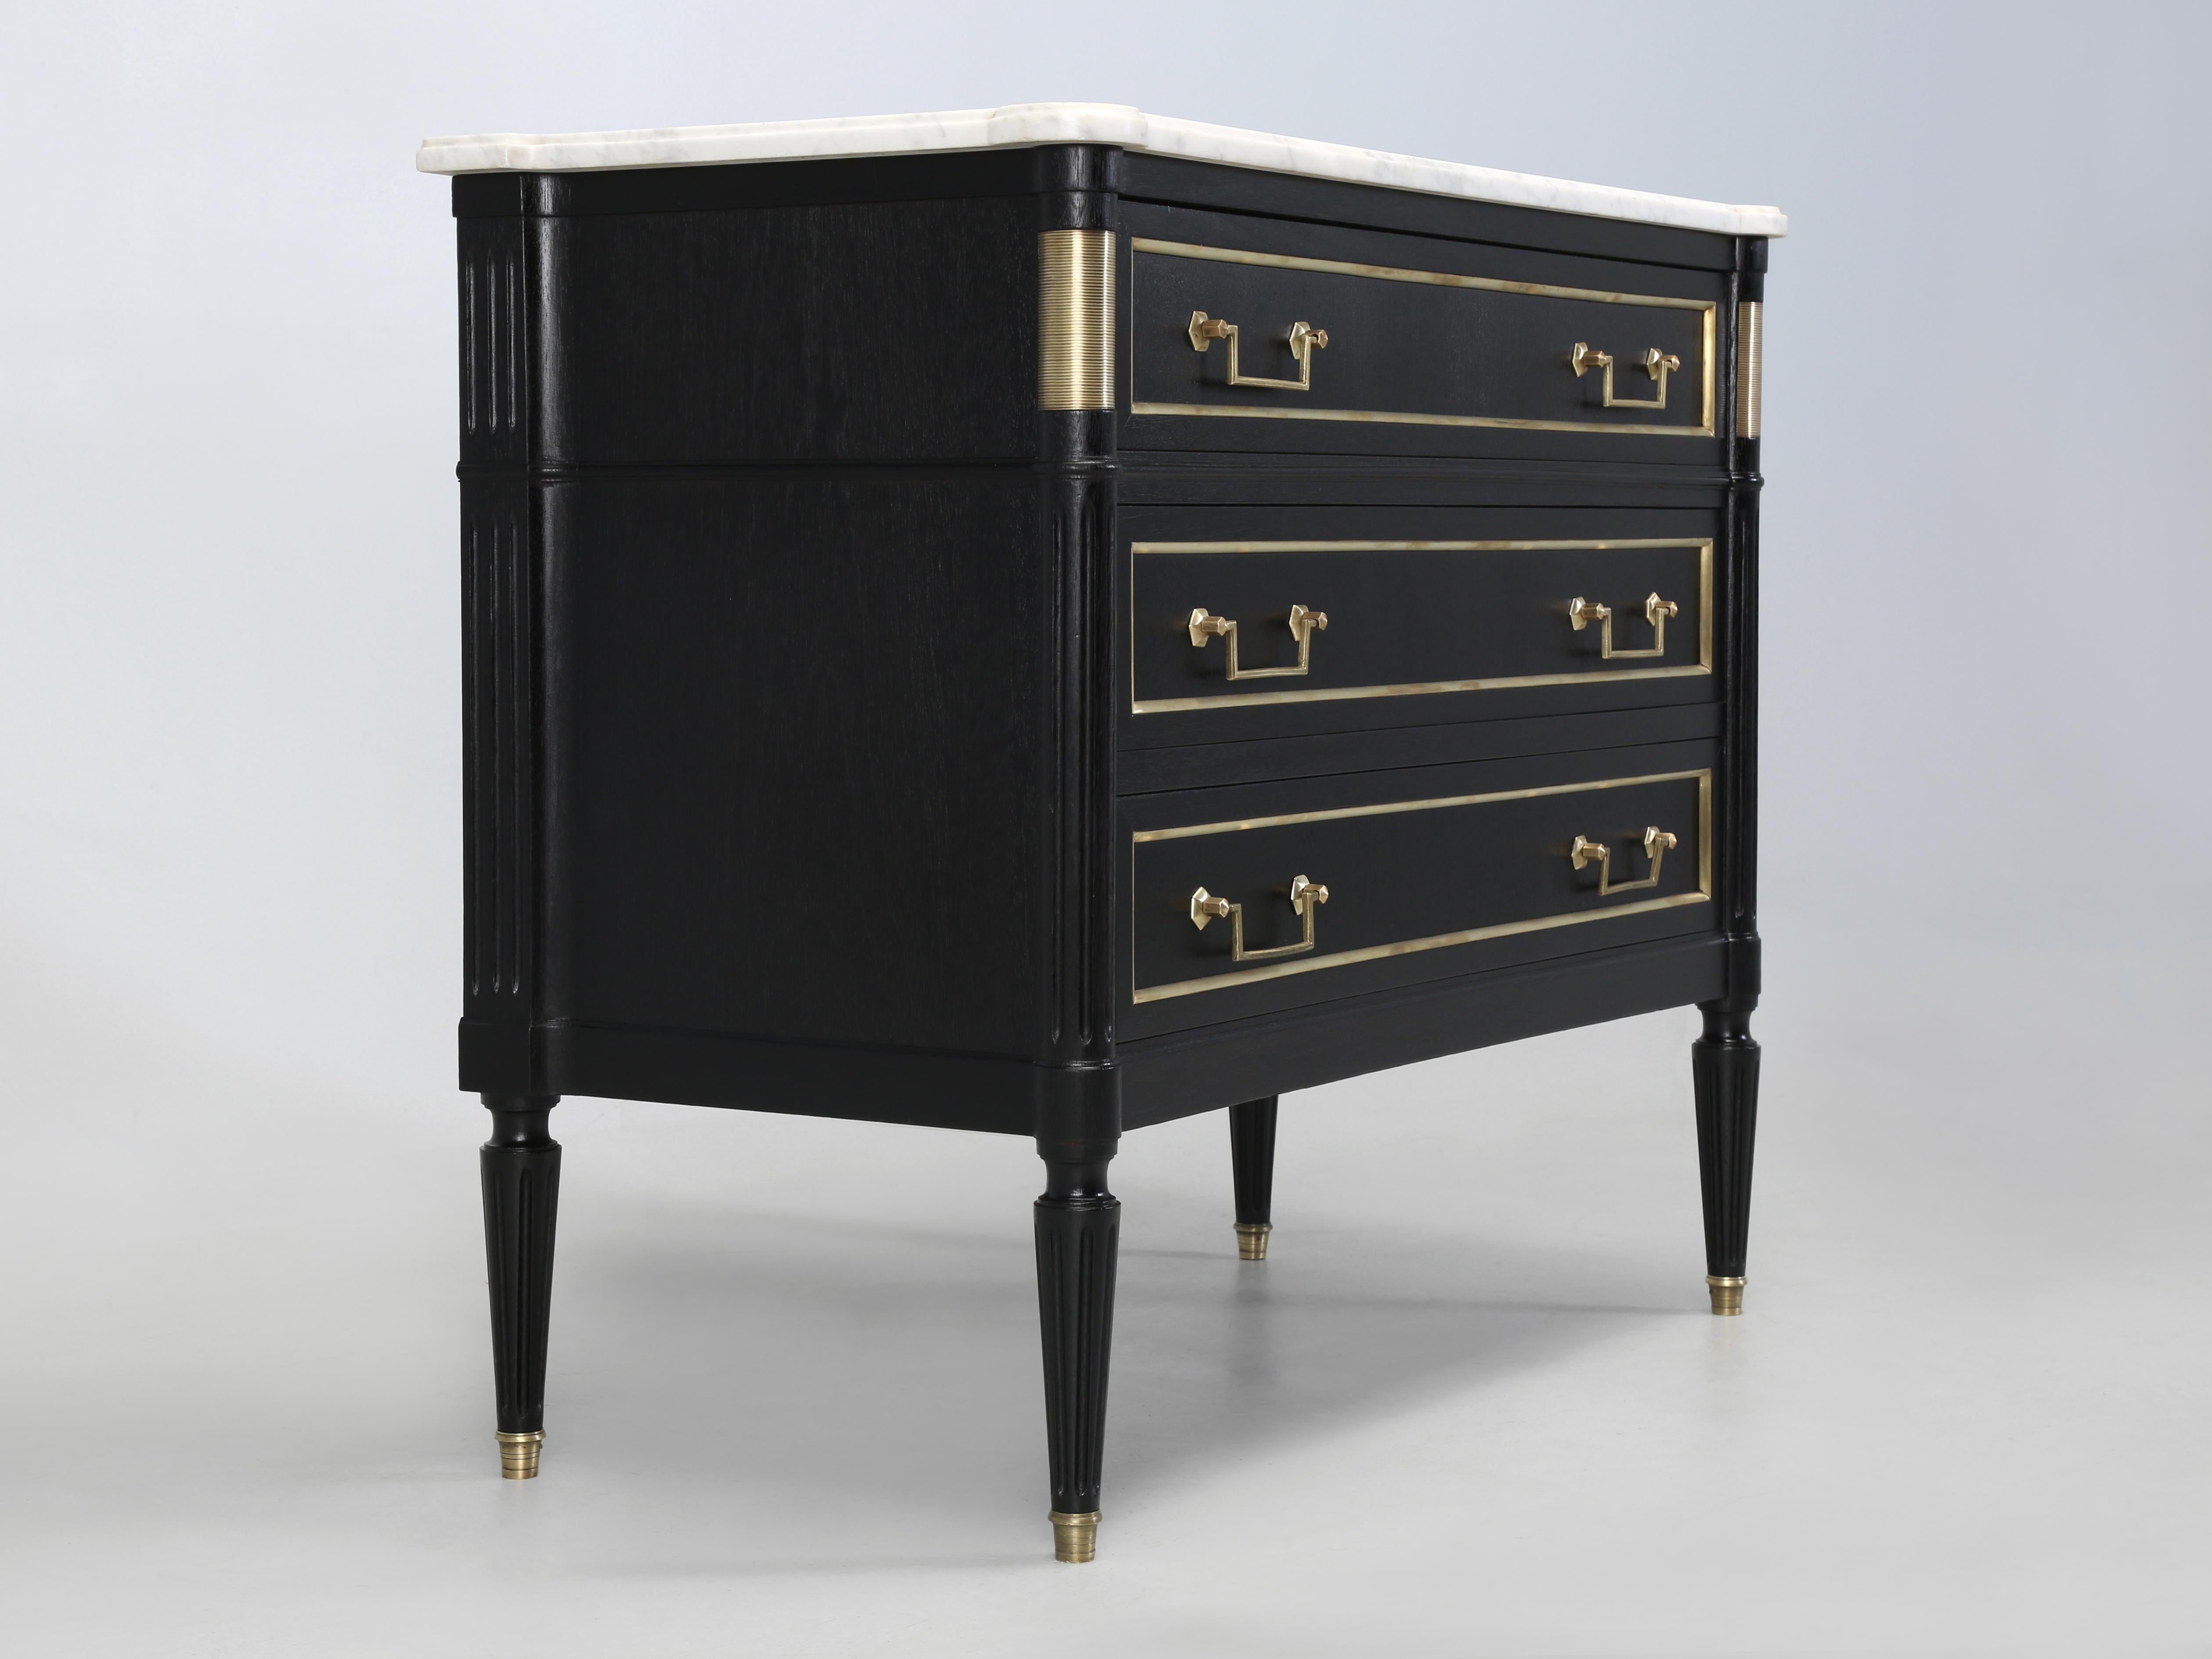 French Louis XVI Commode with its Original Marble Top. Our Old Plank Restoration Department removed the old tired lacquer, without the use of any harsh chemicals and applied an old school Ebonized finish. During the restoration process the drawers